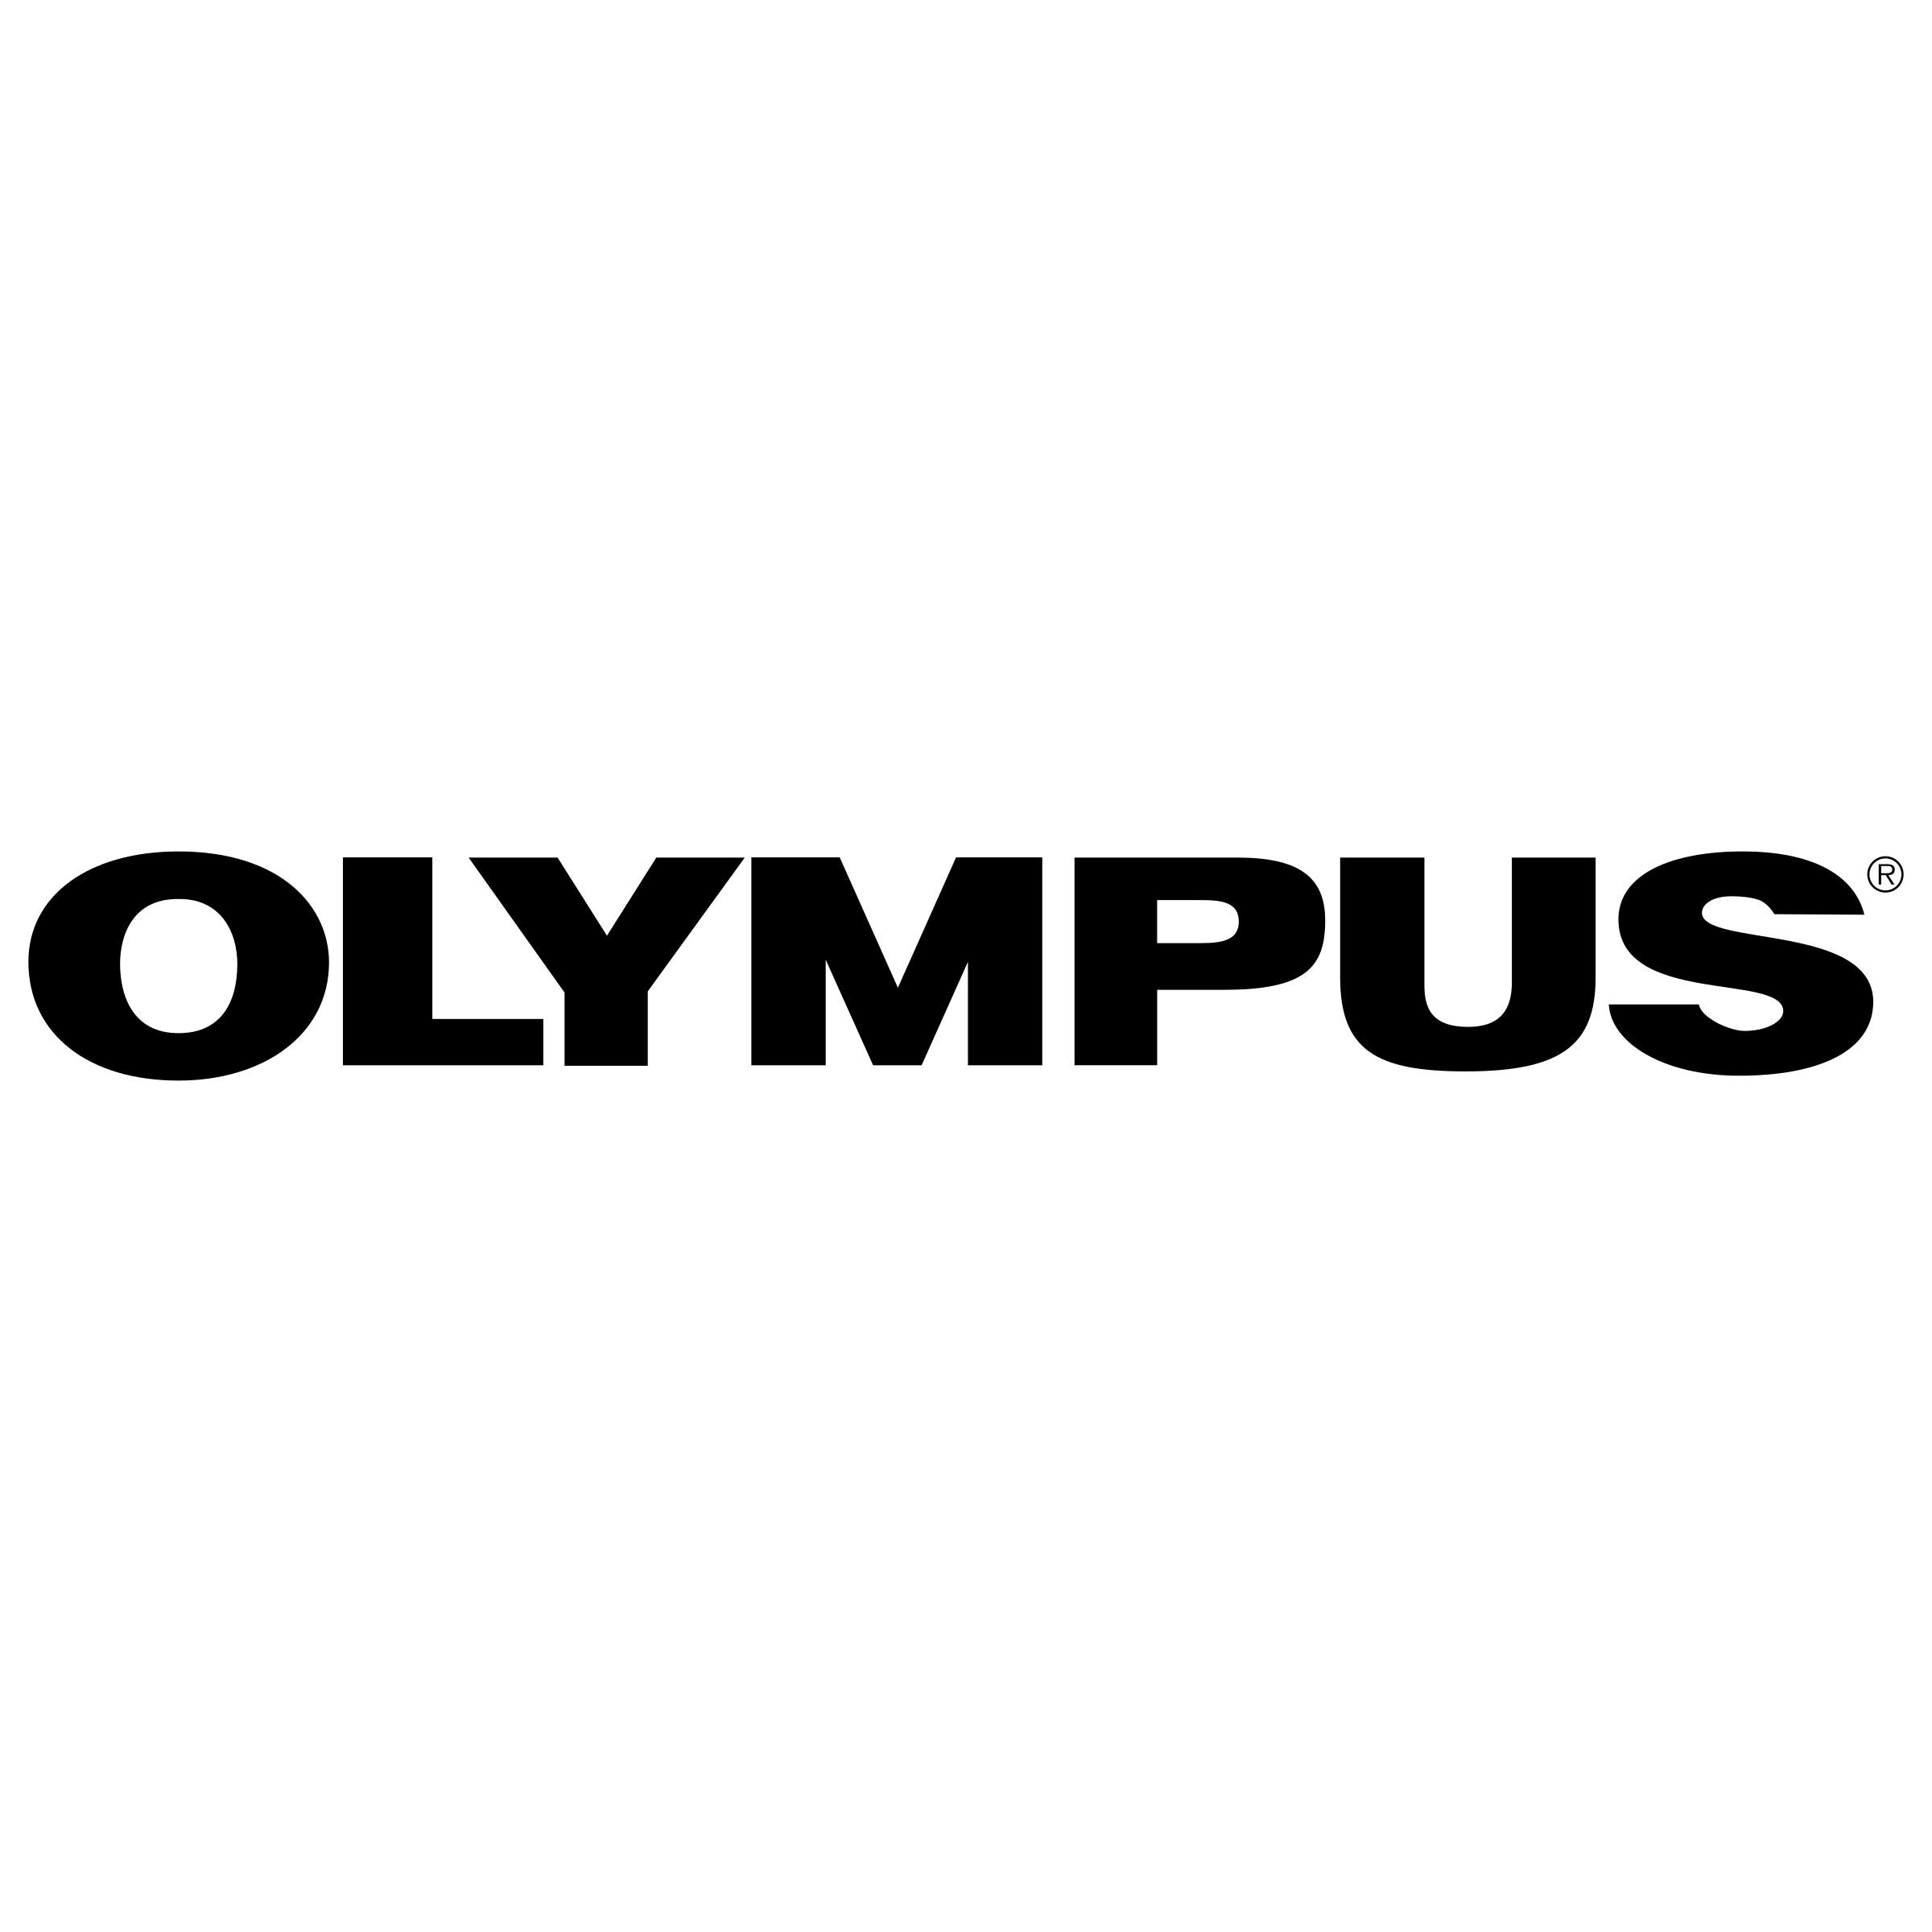 Olympis Logo - Olympus Logo PNG Transparent & SVG Vector - Freebie Supply